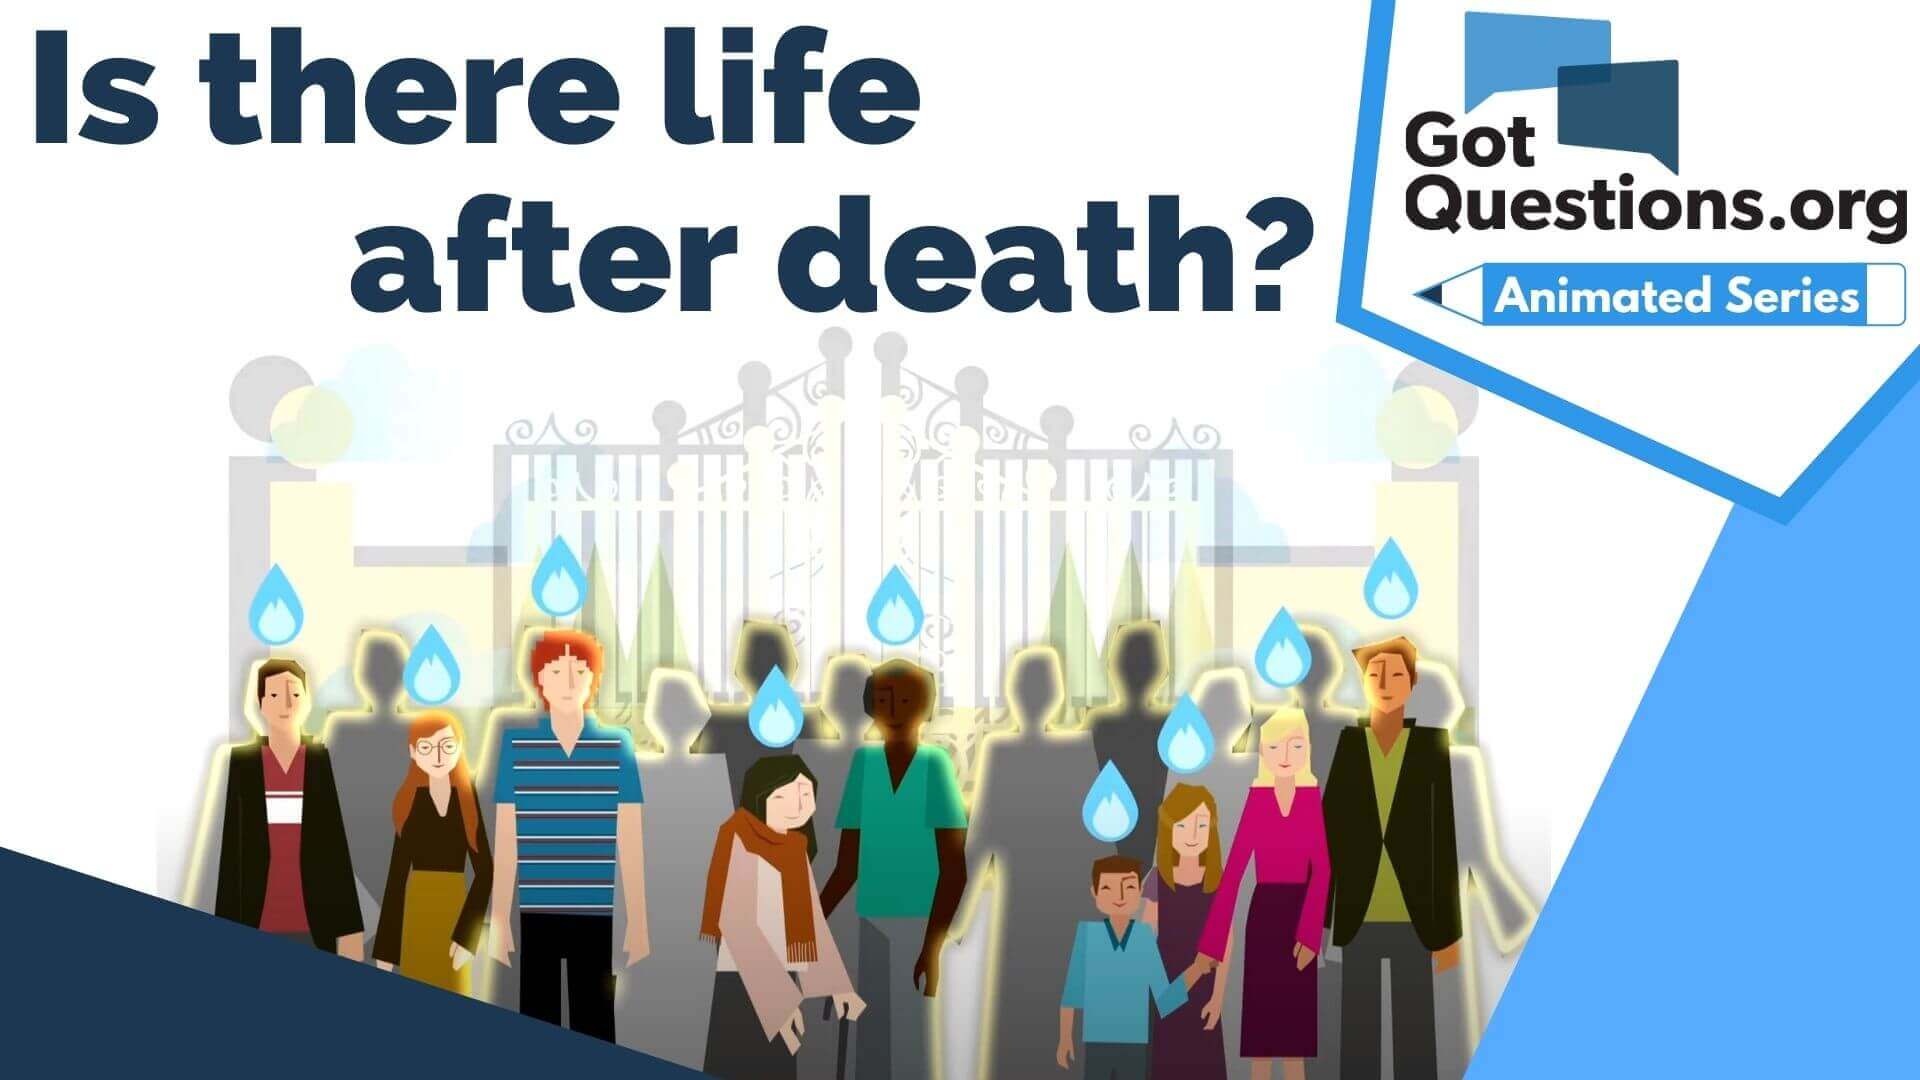 How long is Life After Death?